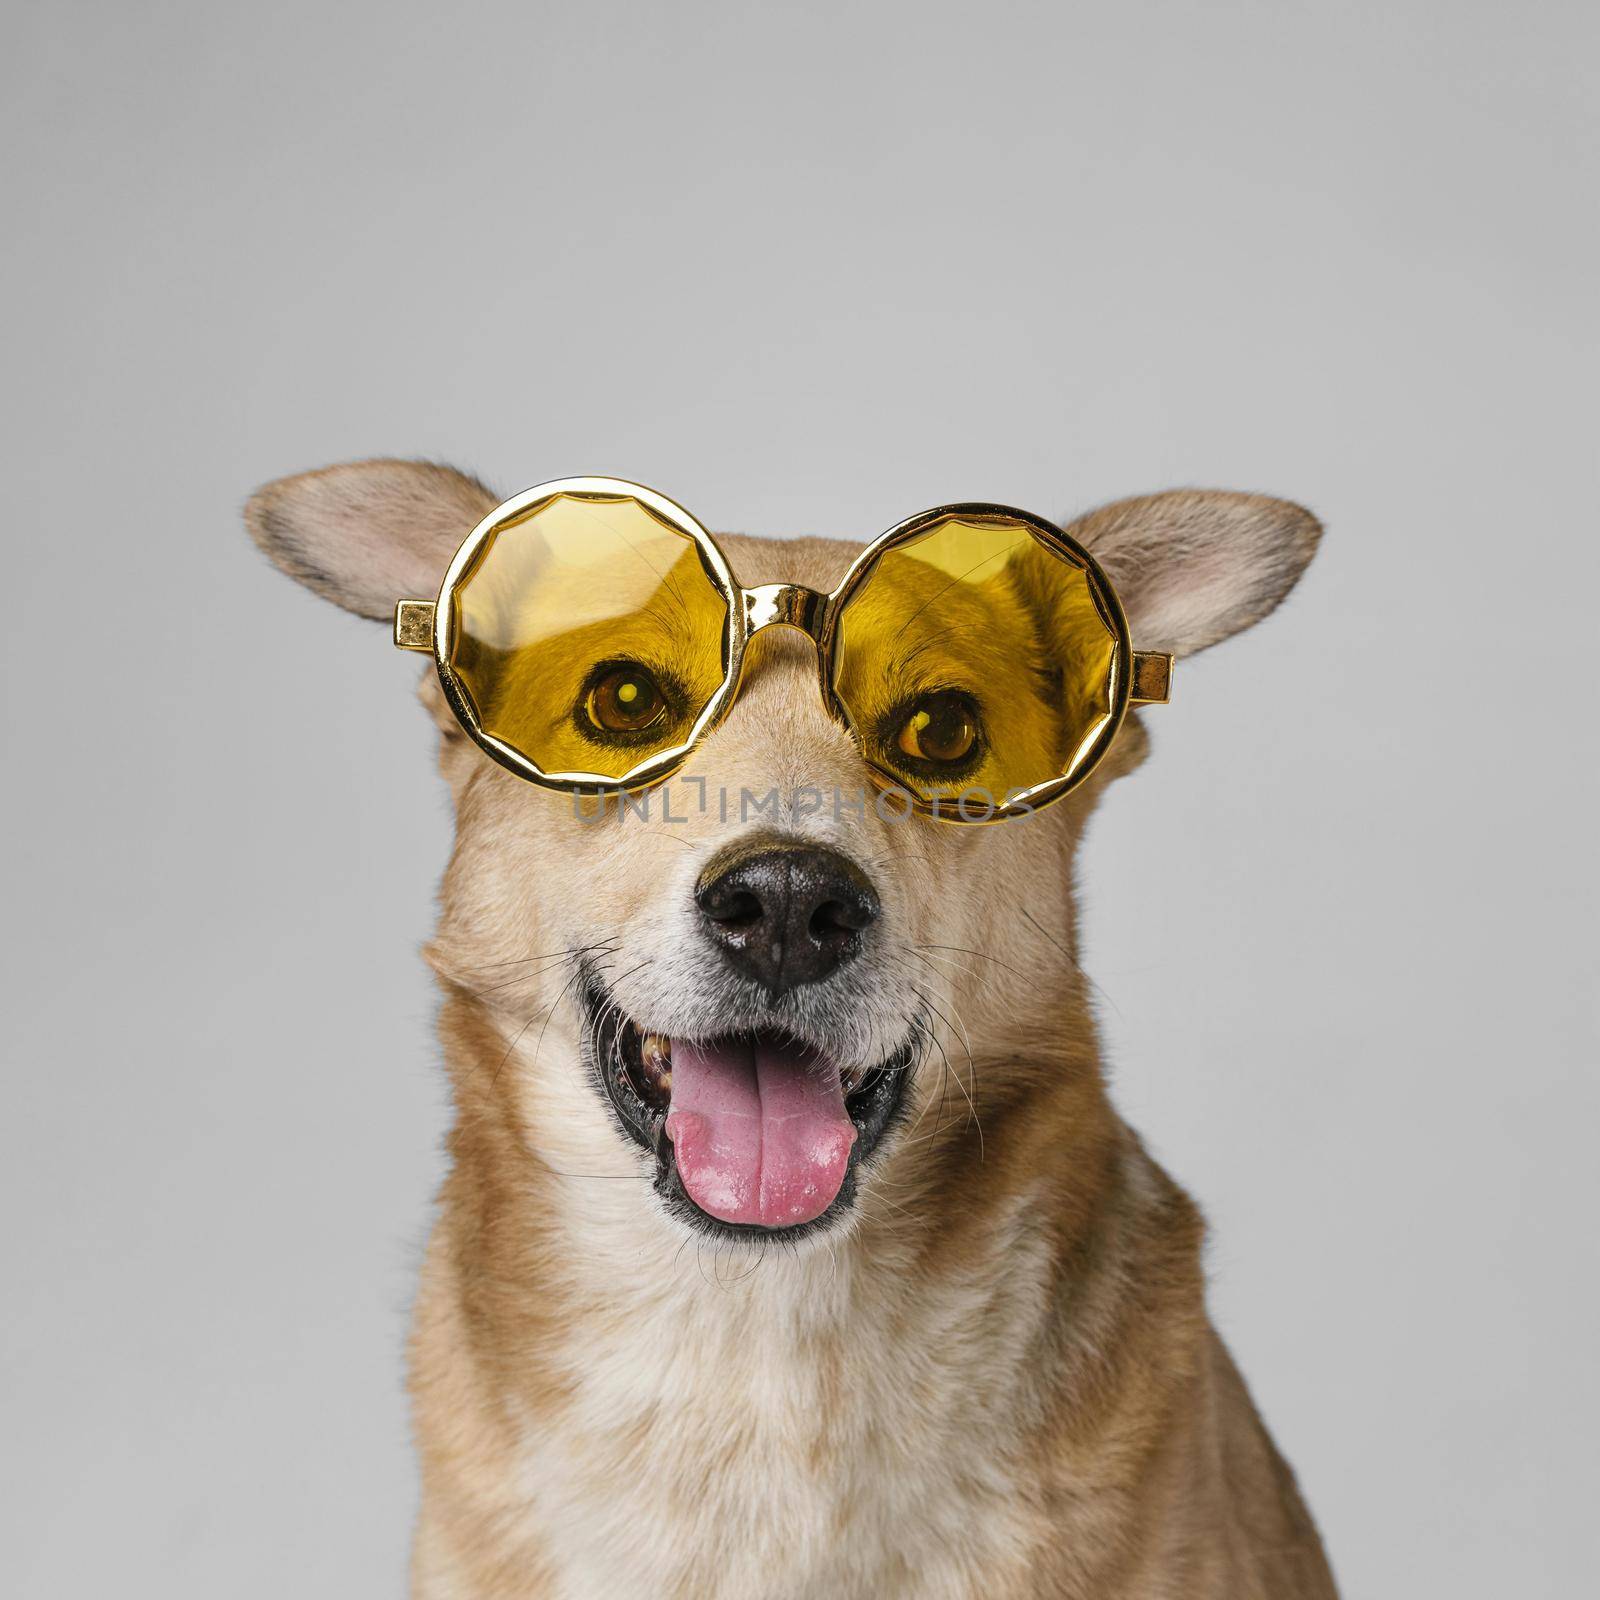 cute smiley dog wearing sunglasses. Resolution and high quality beautiful photo